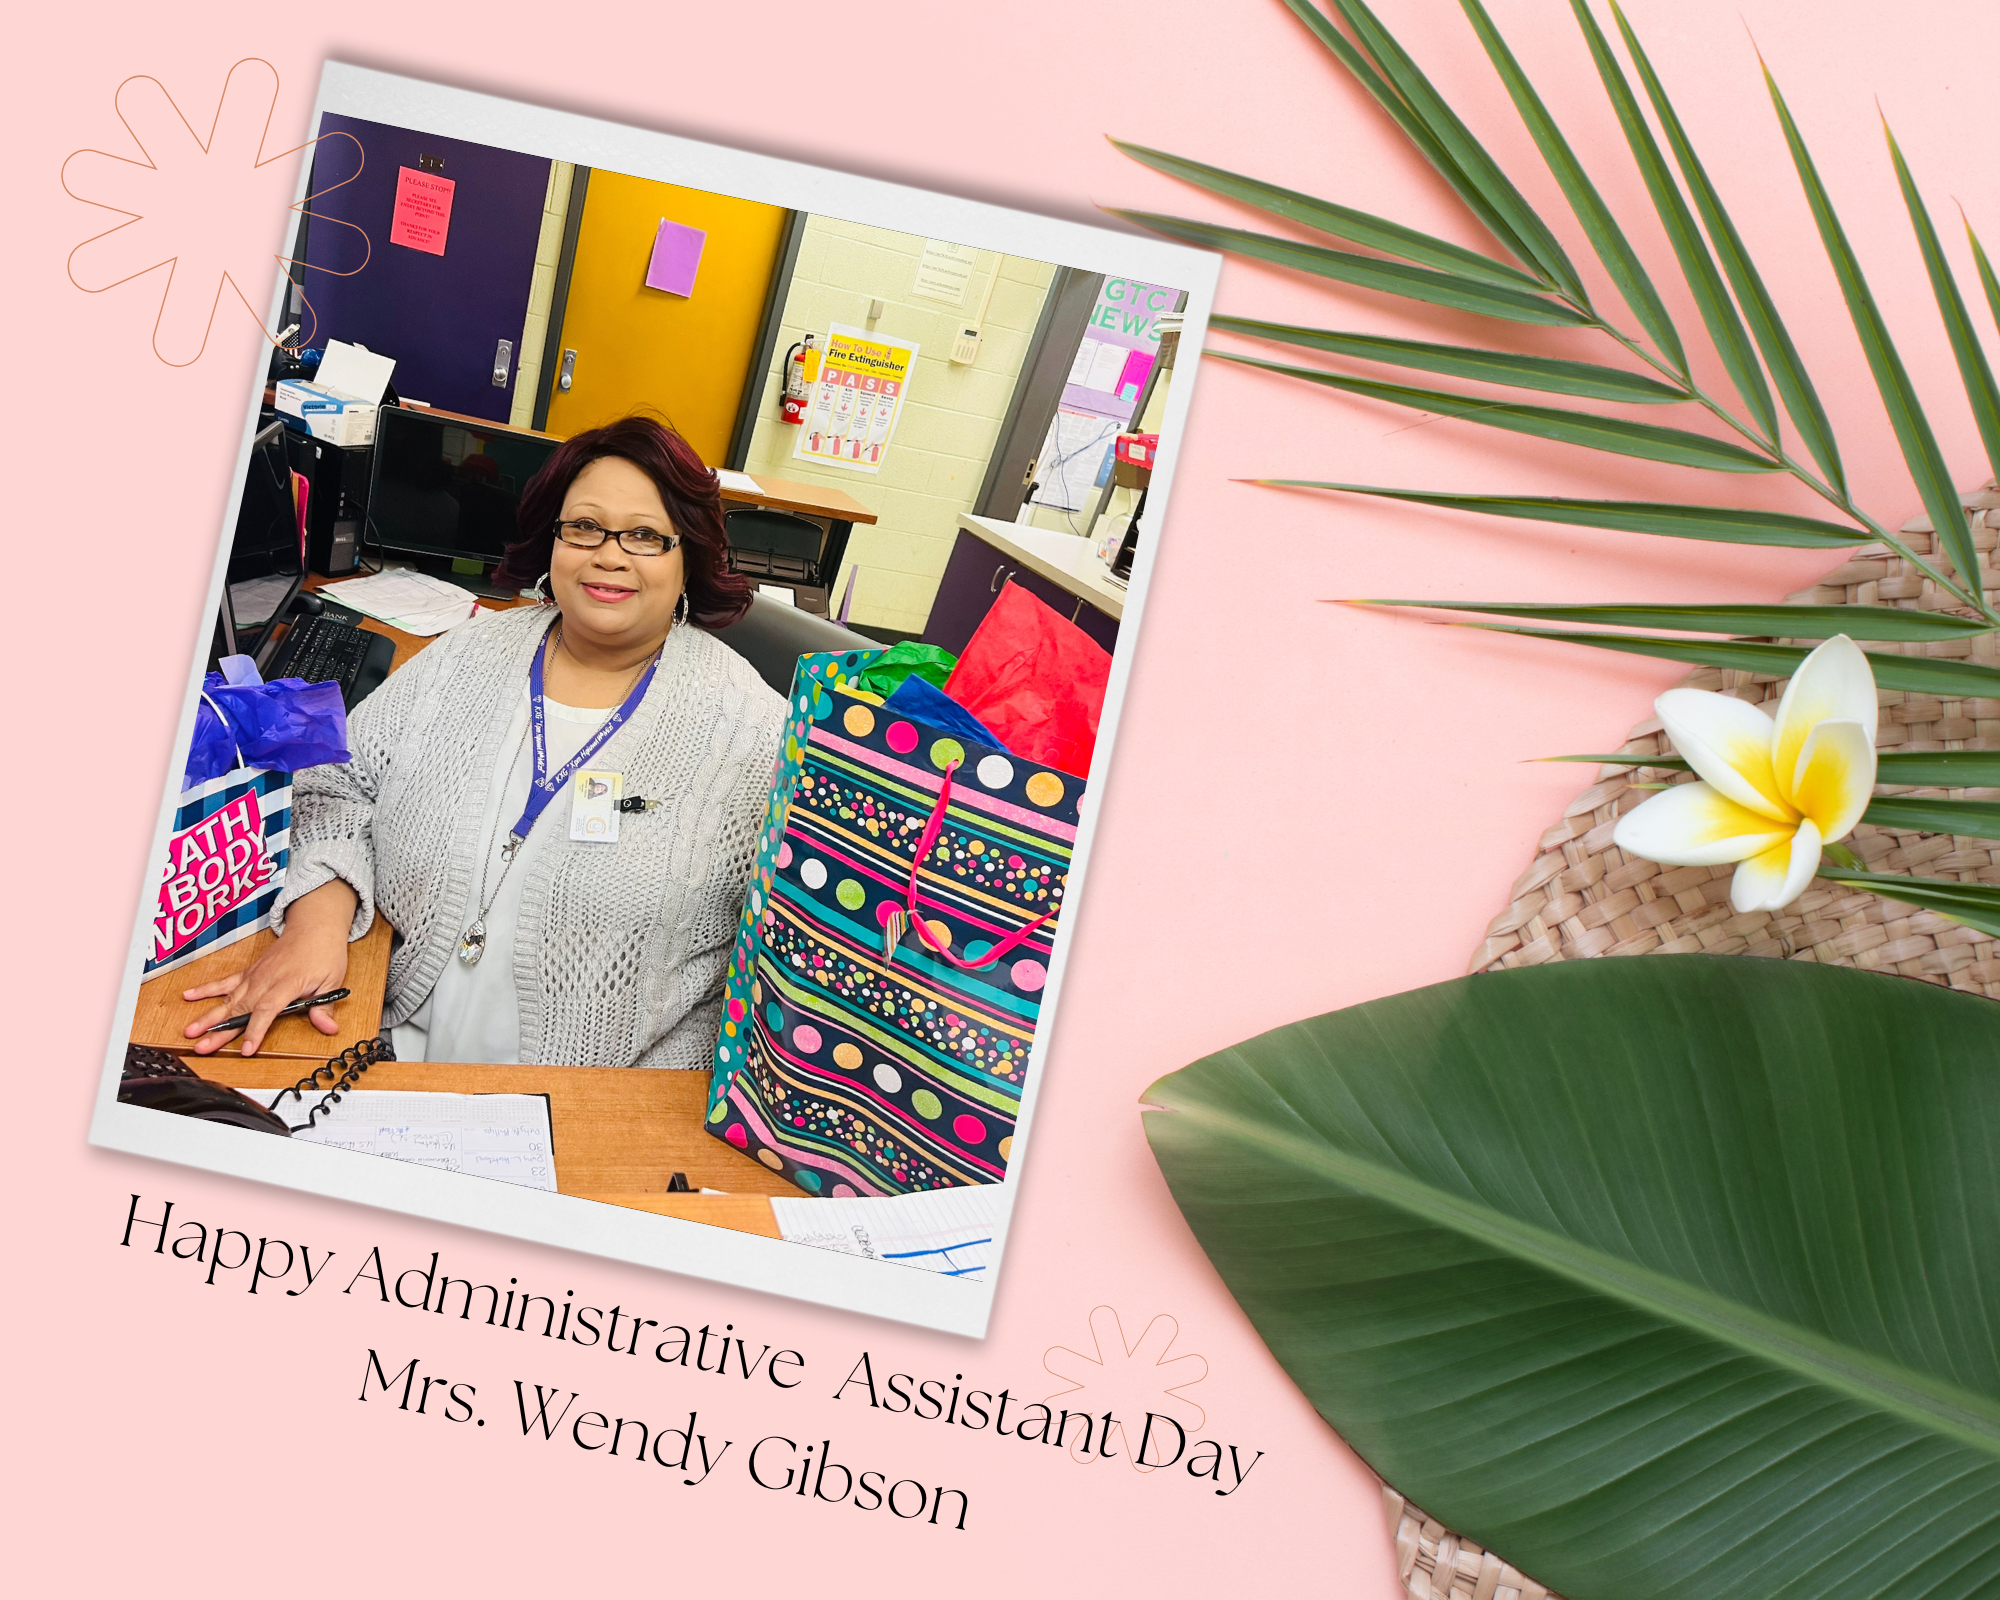 Happy Administrative Assistant Day Mrs. Wendy Gibson  